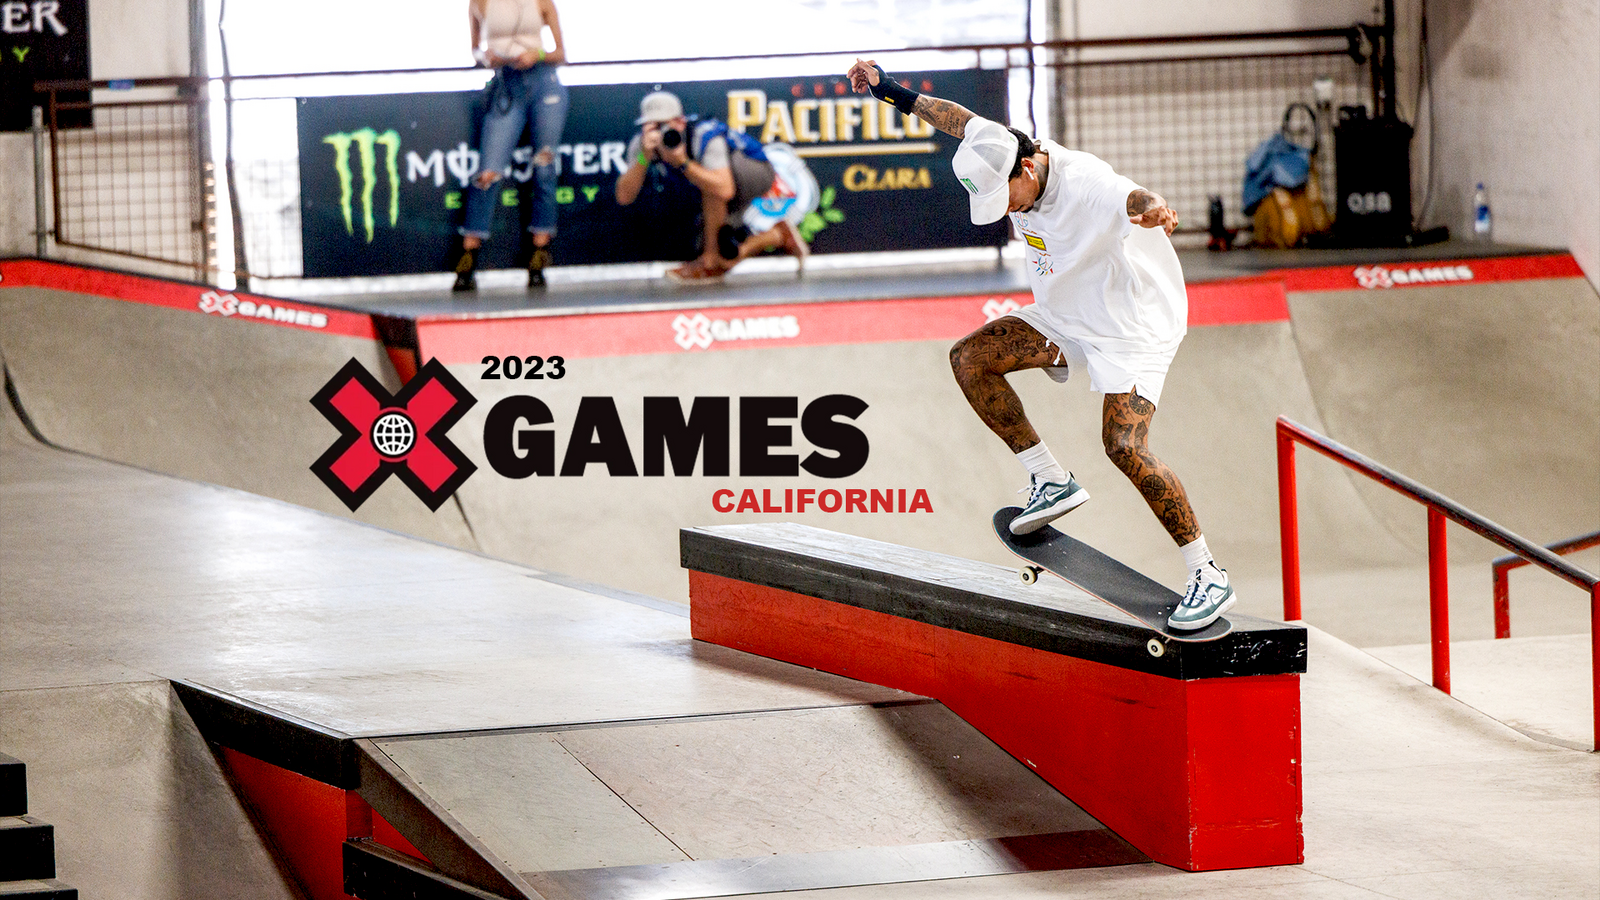 X Games will return next month, with events in 3 SoCal locations